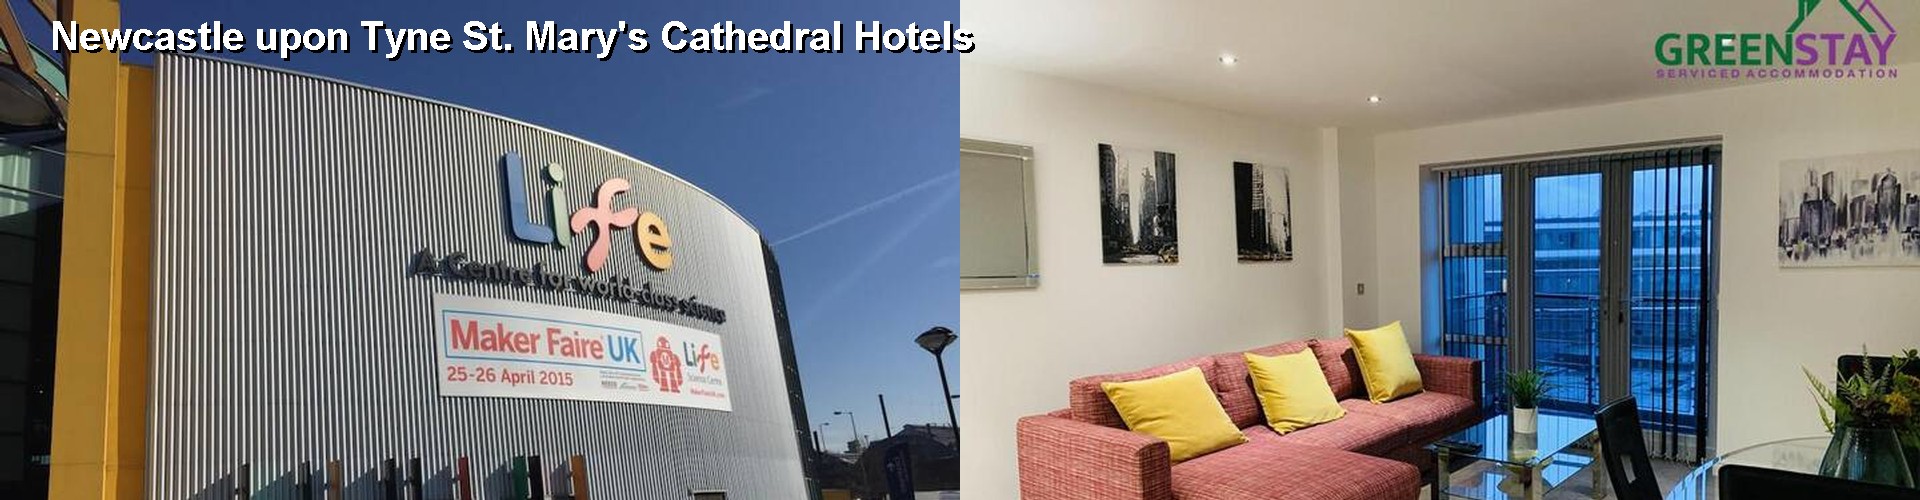 5 Best Hotels near Newcastle upon Tyne St. Mary's Cathedral